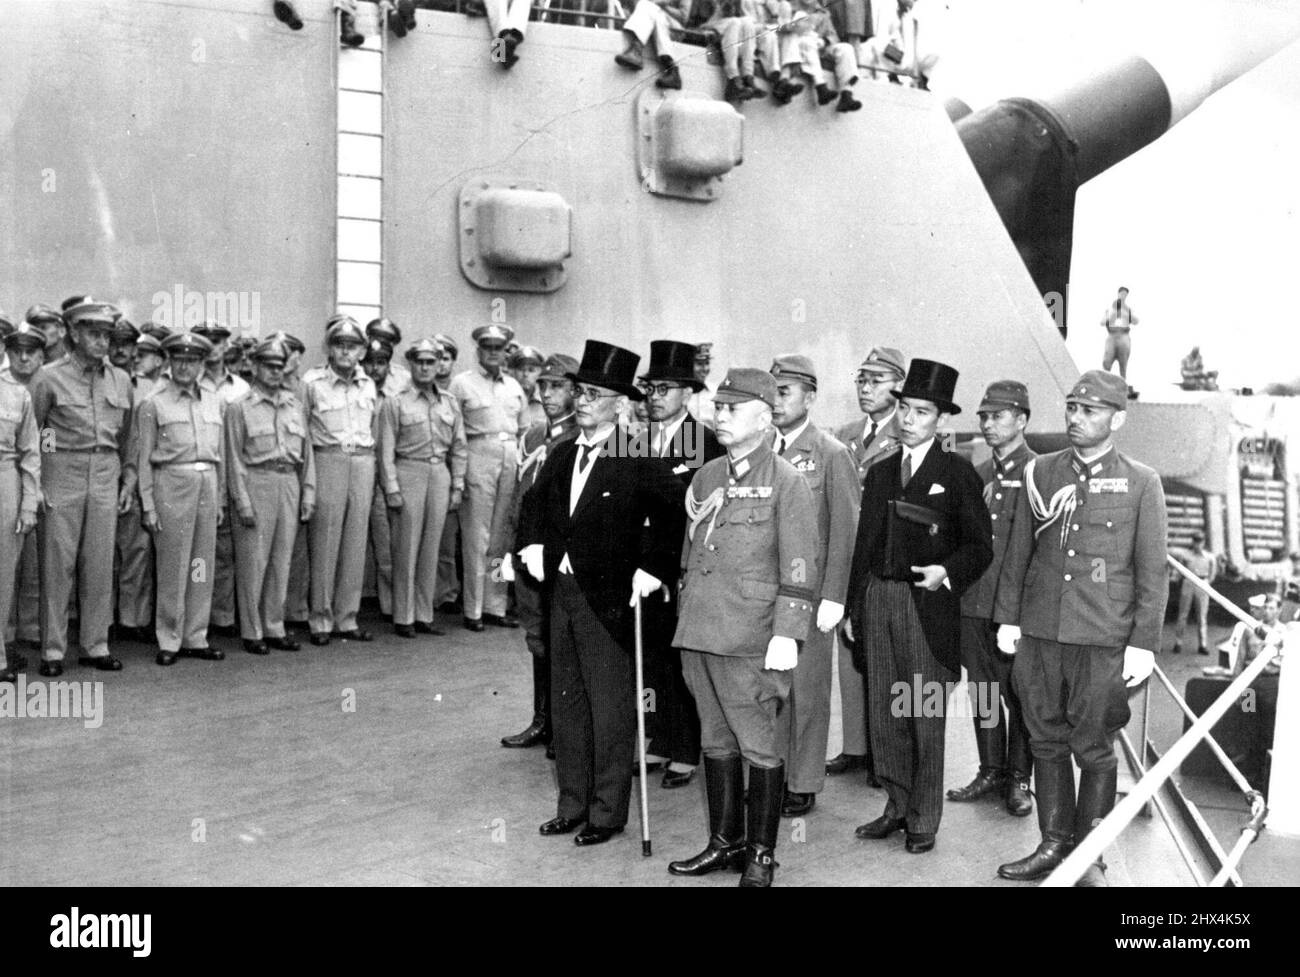 Japanese Officials Arrive U.S. Battleship For Surrender Ceremony -- The Japanese military and diplomatic delegation, headed by Foreign Minister Mamoru Shigemitsu (with cane) and General Yoshijiro Umezu (front, right), Chief of the Imperial General Staff, arrive aboard the U.S. 'battleship Missouri to attend formal surrender ceremonies, as Allied military officers look on. The Japanese capitulation documents were signed on Sept. 1, 1945, aboard the 45,000-ton battleship in Tokyo-Bay, south of the Japanese capital. June 9, 1945. Stock Photo